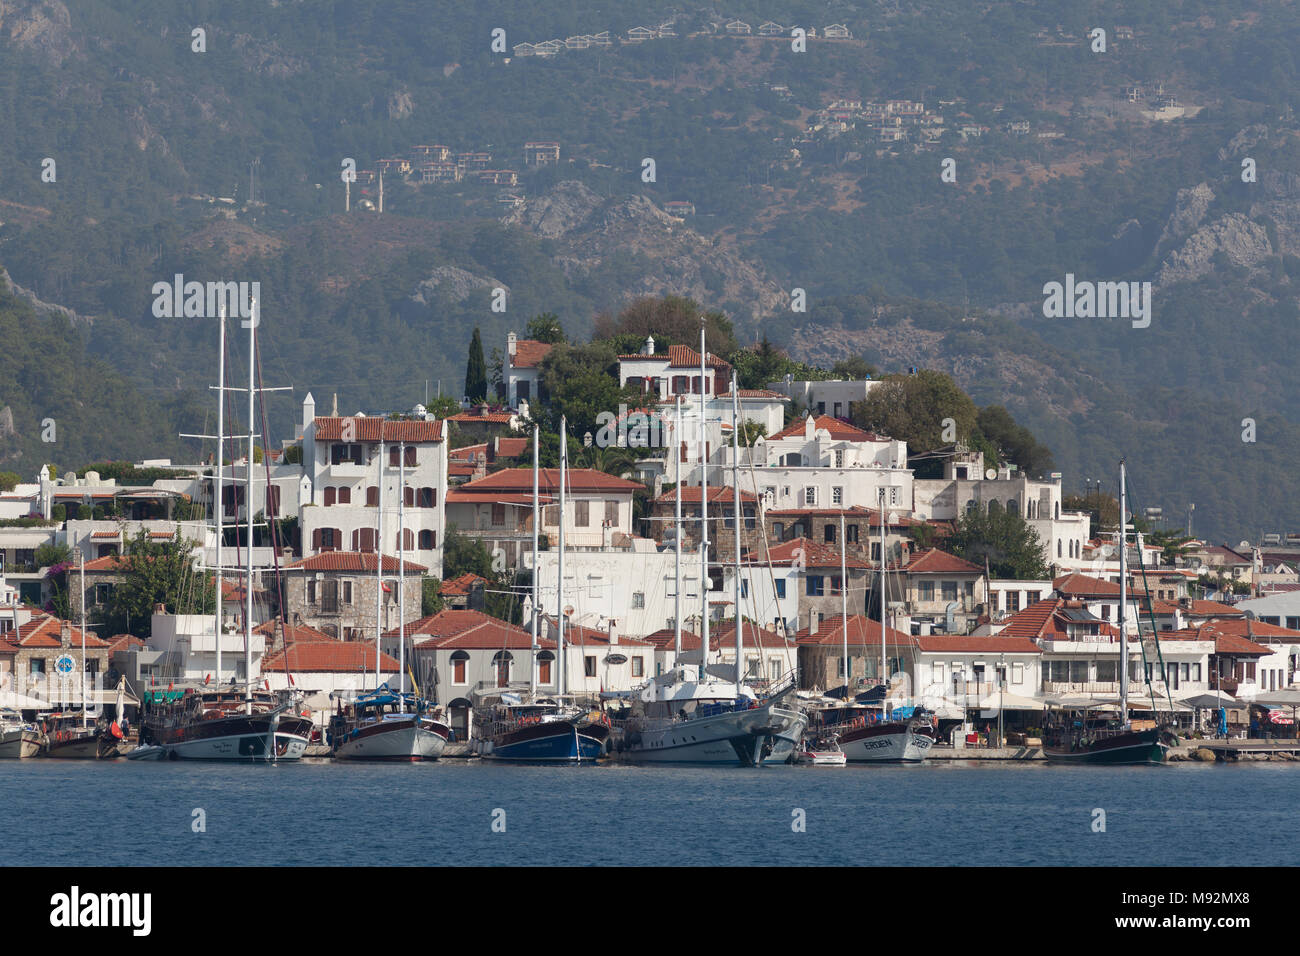 View from the sea to the white houses of the city of Marmaris, Turkey, 11 August, 2017 Stock Photo